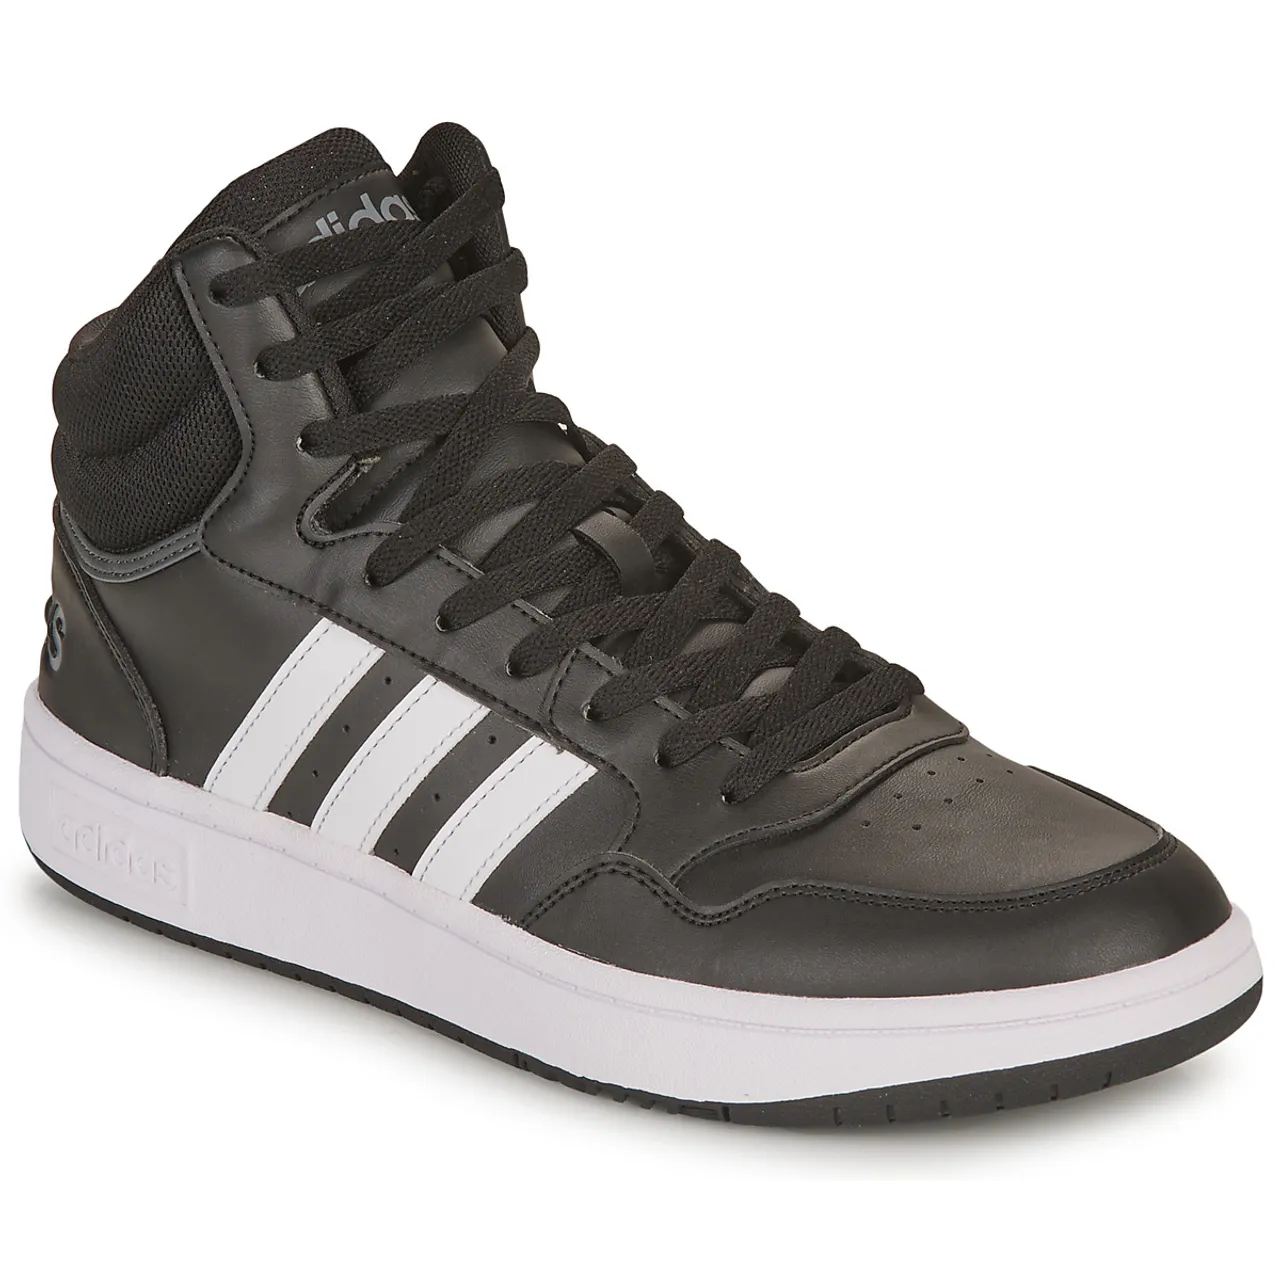 adidas  HOOPS 3.0 MID  men's Shoes (High-top Trainers) in Black